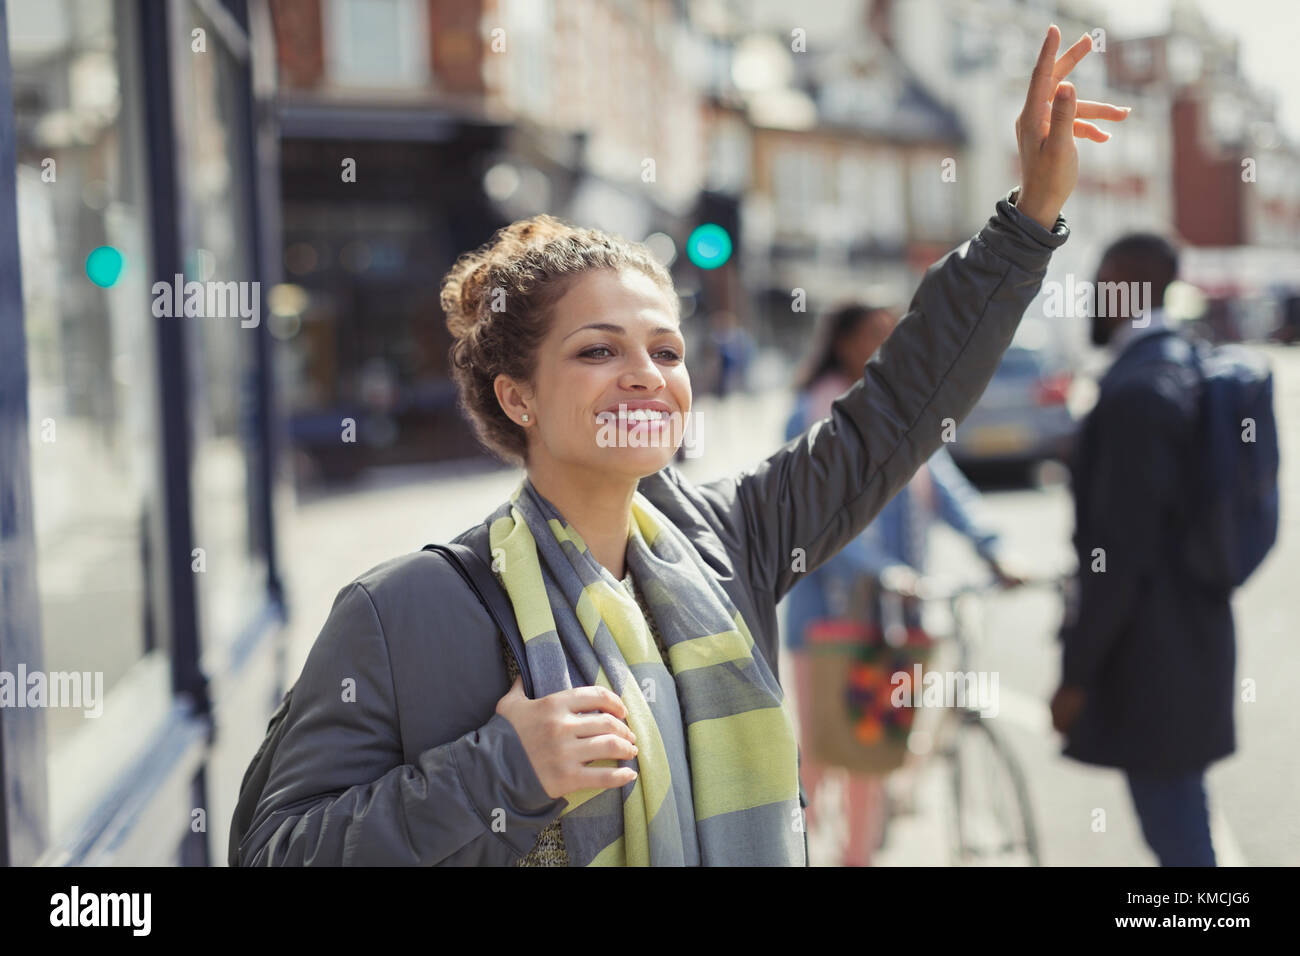 Smiling young woman hailing taxi on sunny urban street Stock Photo